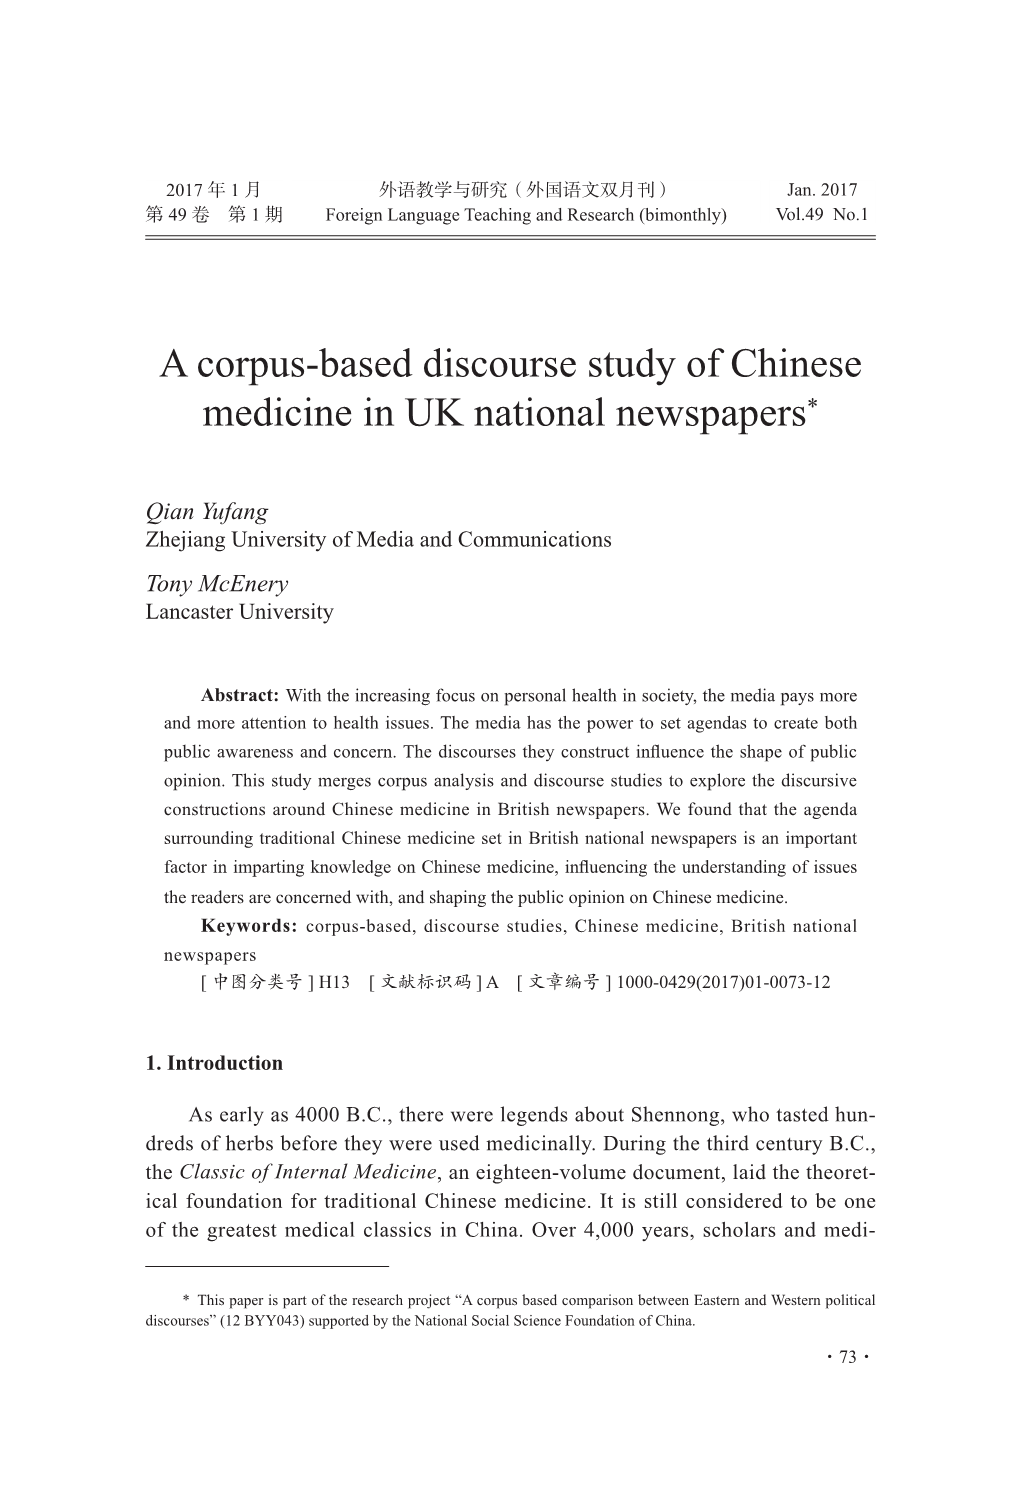 A Corpus-Based Discourse Study of Chinese Medicine in UK National Newspapers*